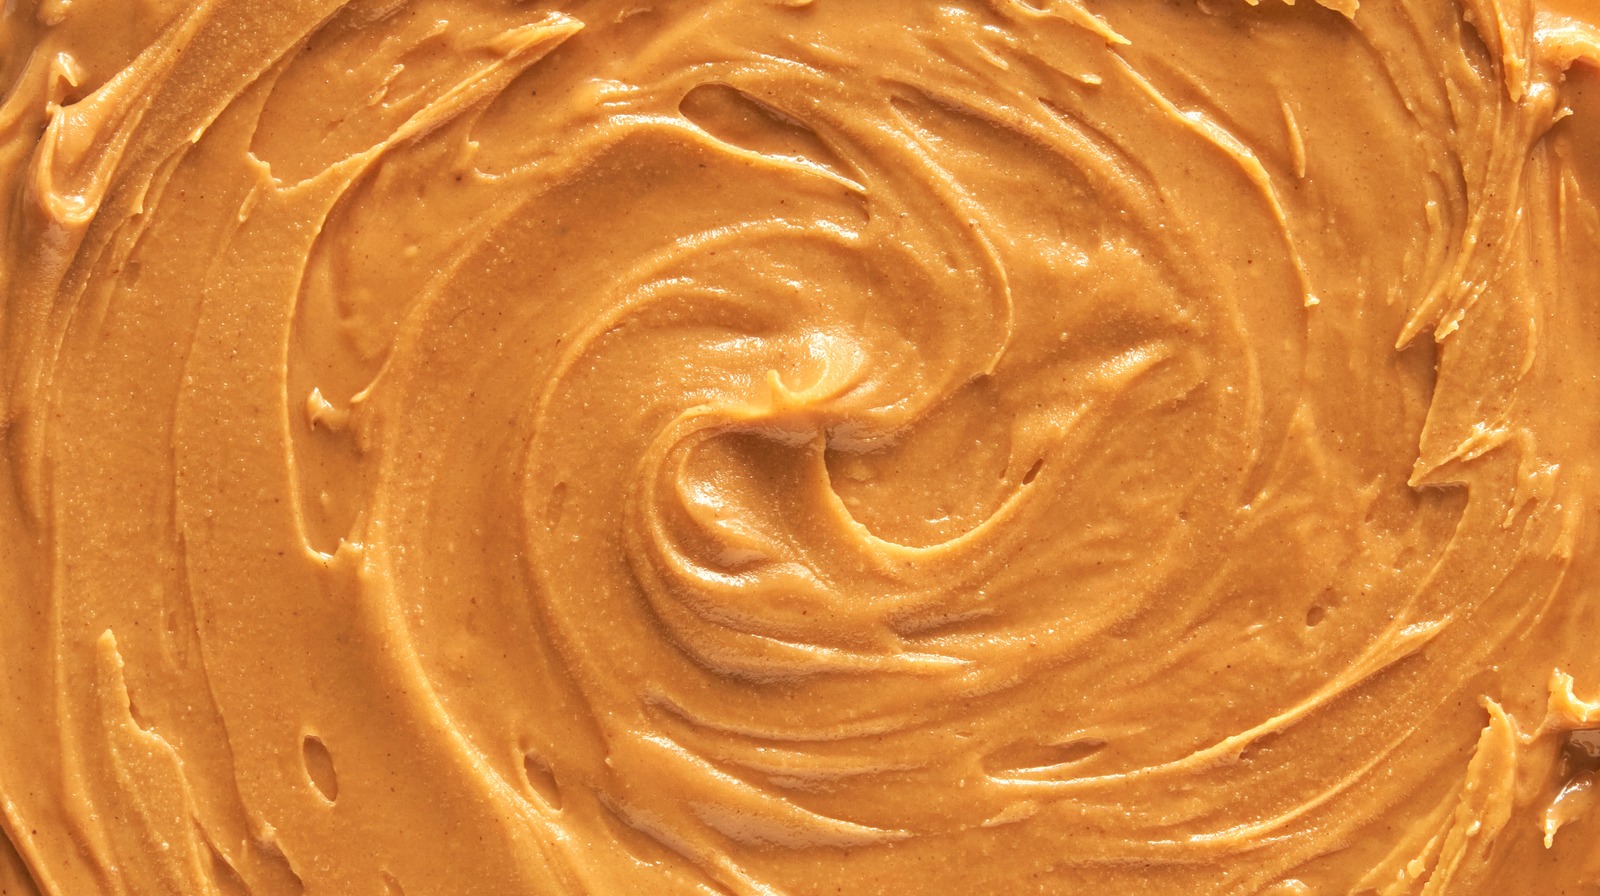 https://www.tastingtable.com/img/gallery/15-facts-about-peanut-butter-you-should-know/l-intro-1680297548.jpg